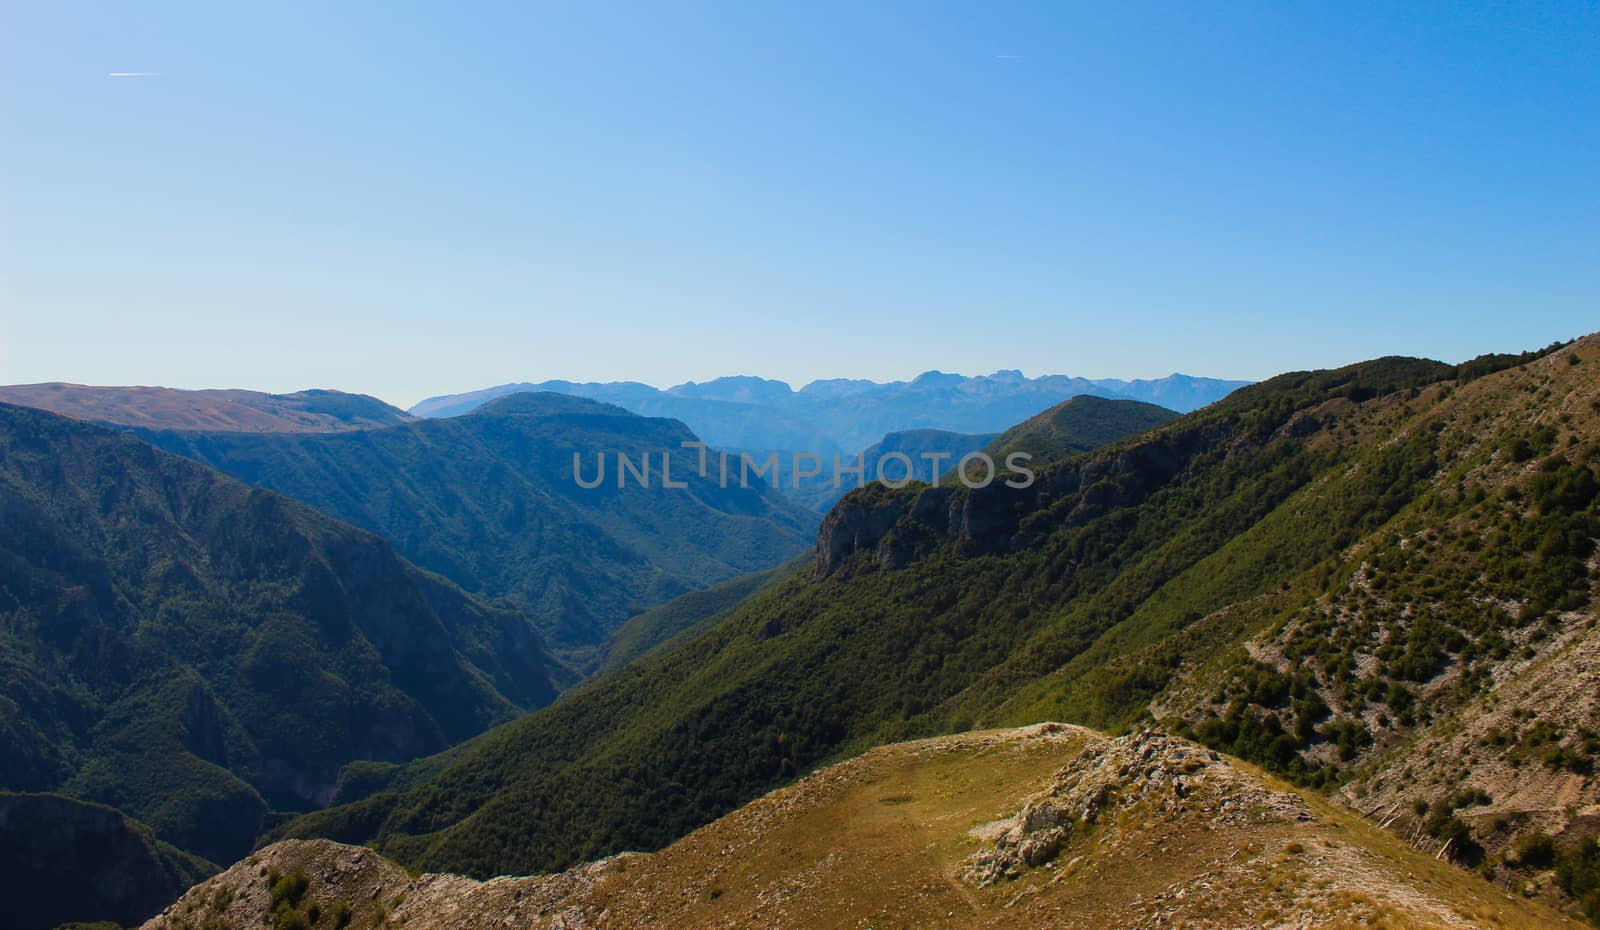 Above the old Bosnian village of Lukomir are beautiful mountains with no vegetation mountain peaks. Bjelasnica Mountain, Bosnia and Herzegovina.